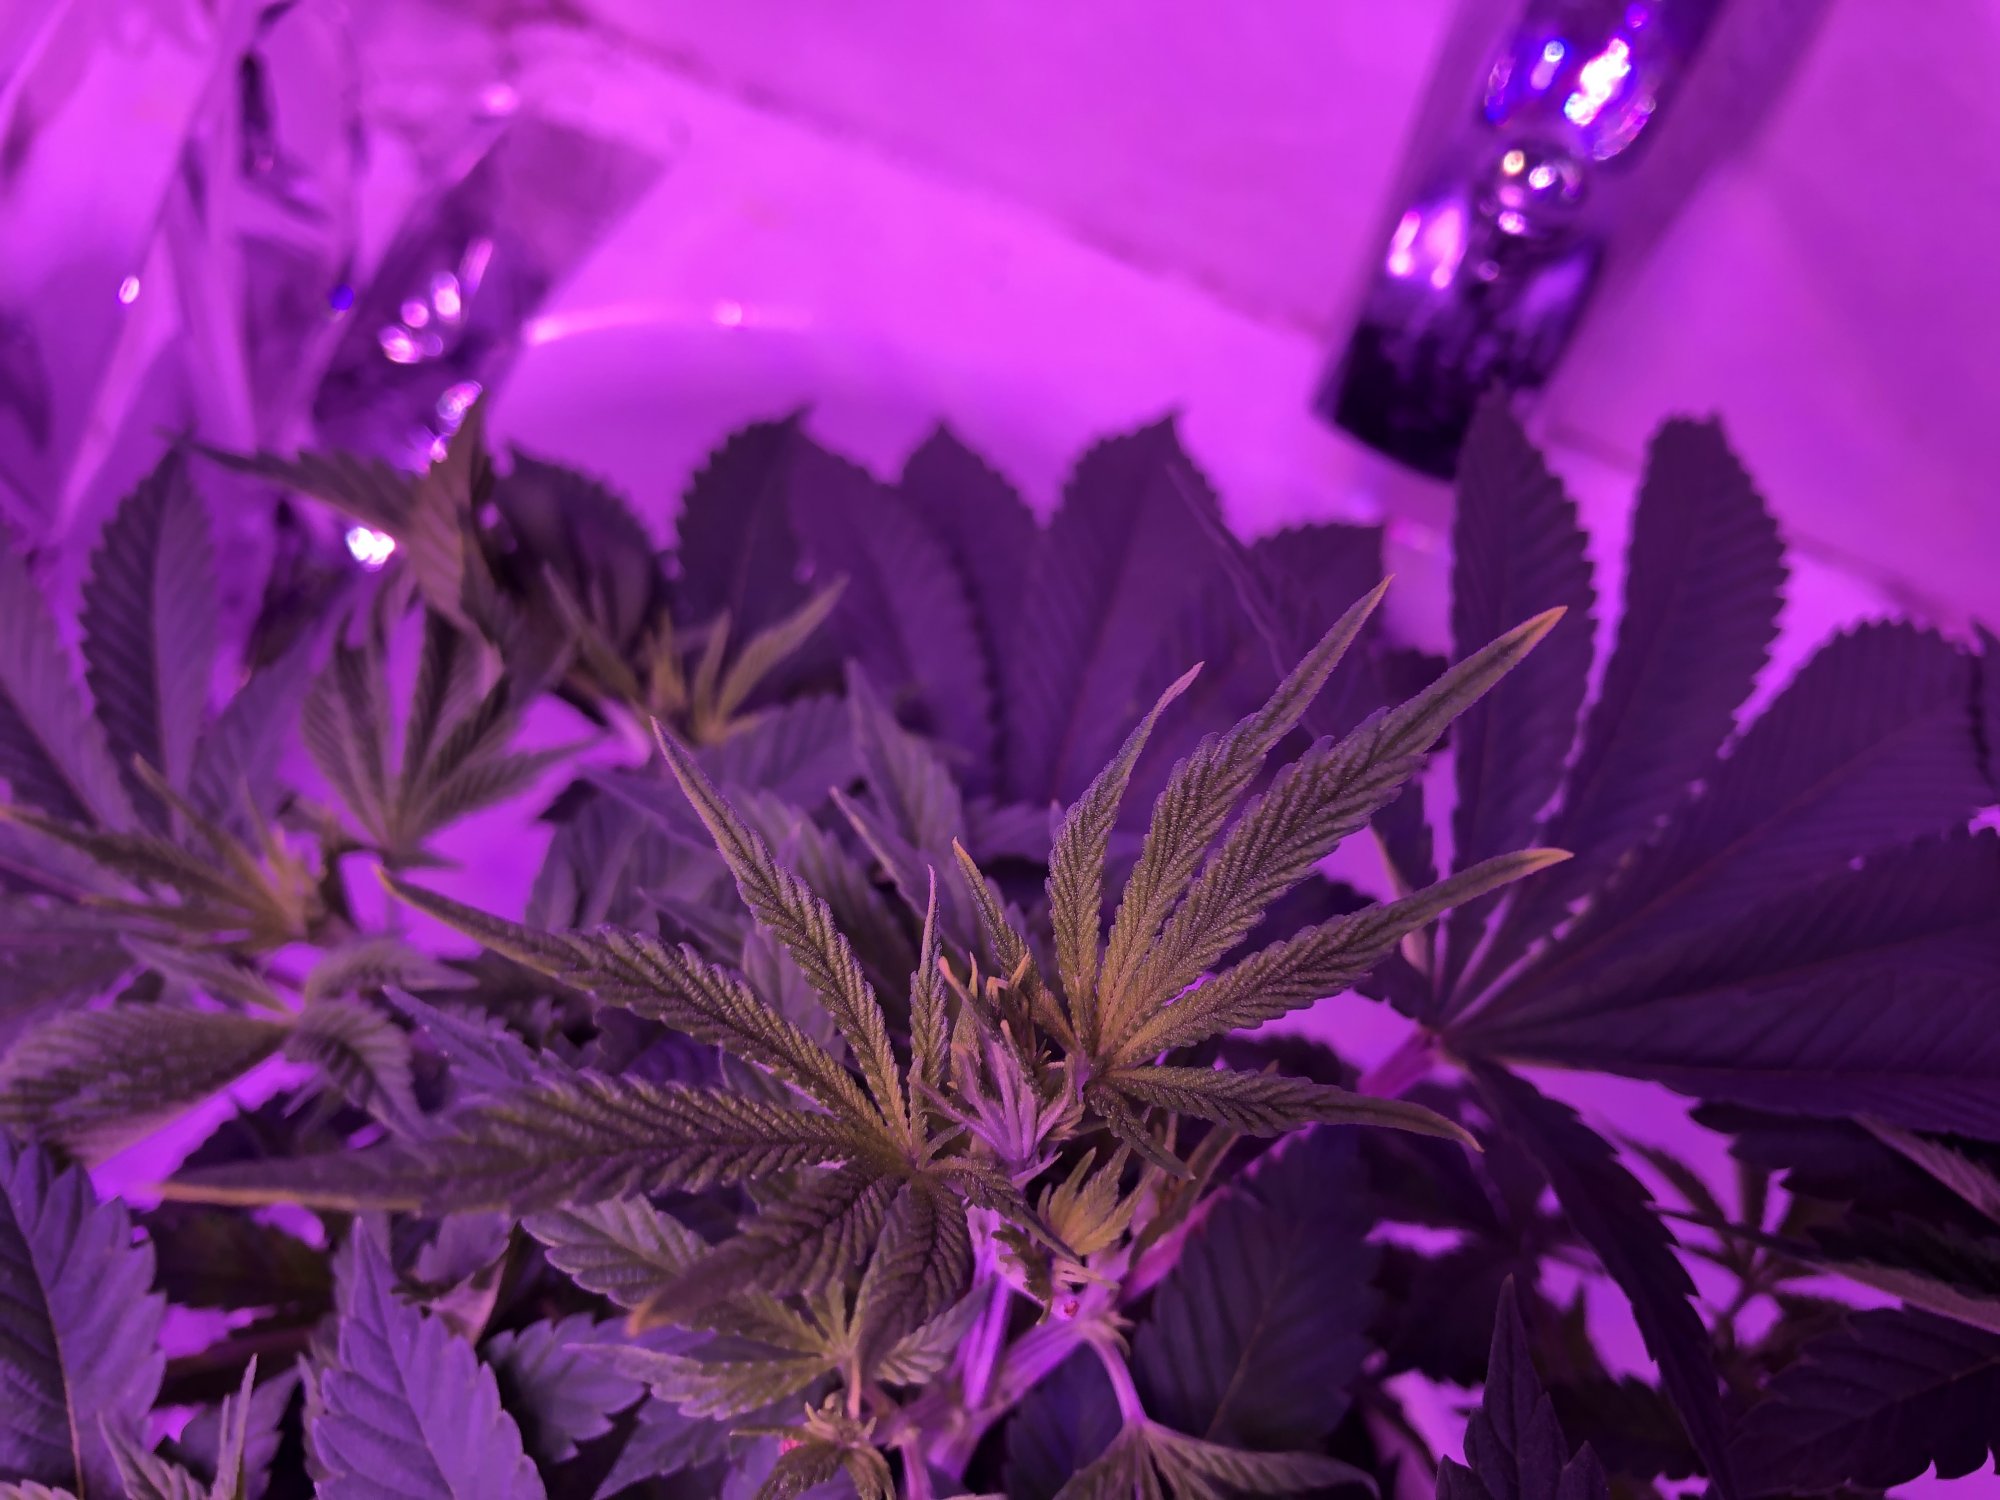 Cant figure out the yellowing only on the new growth tips